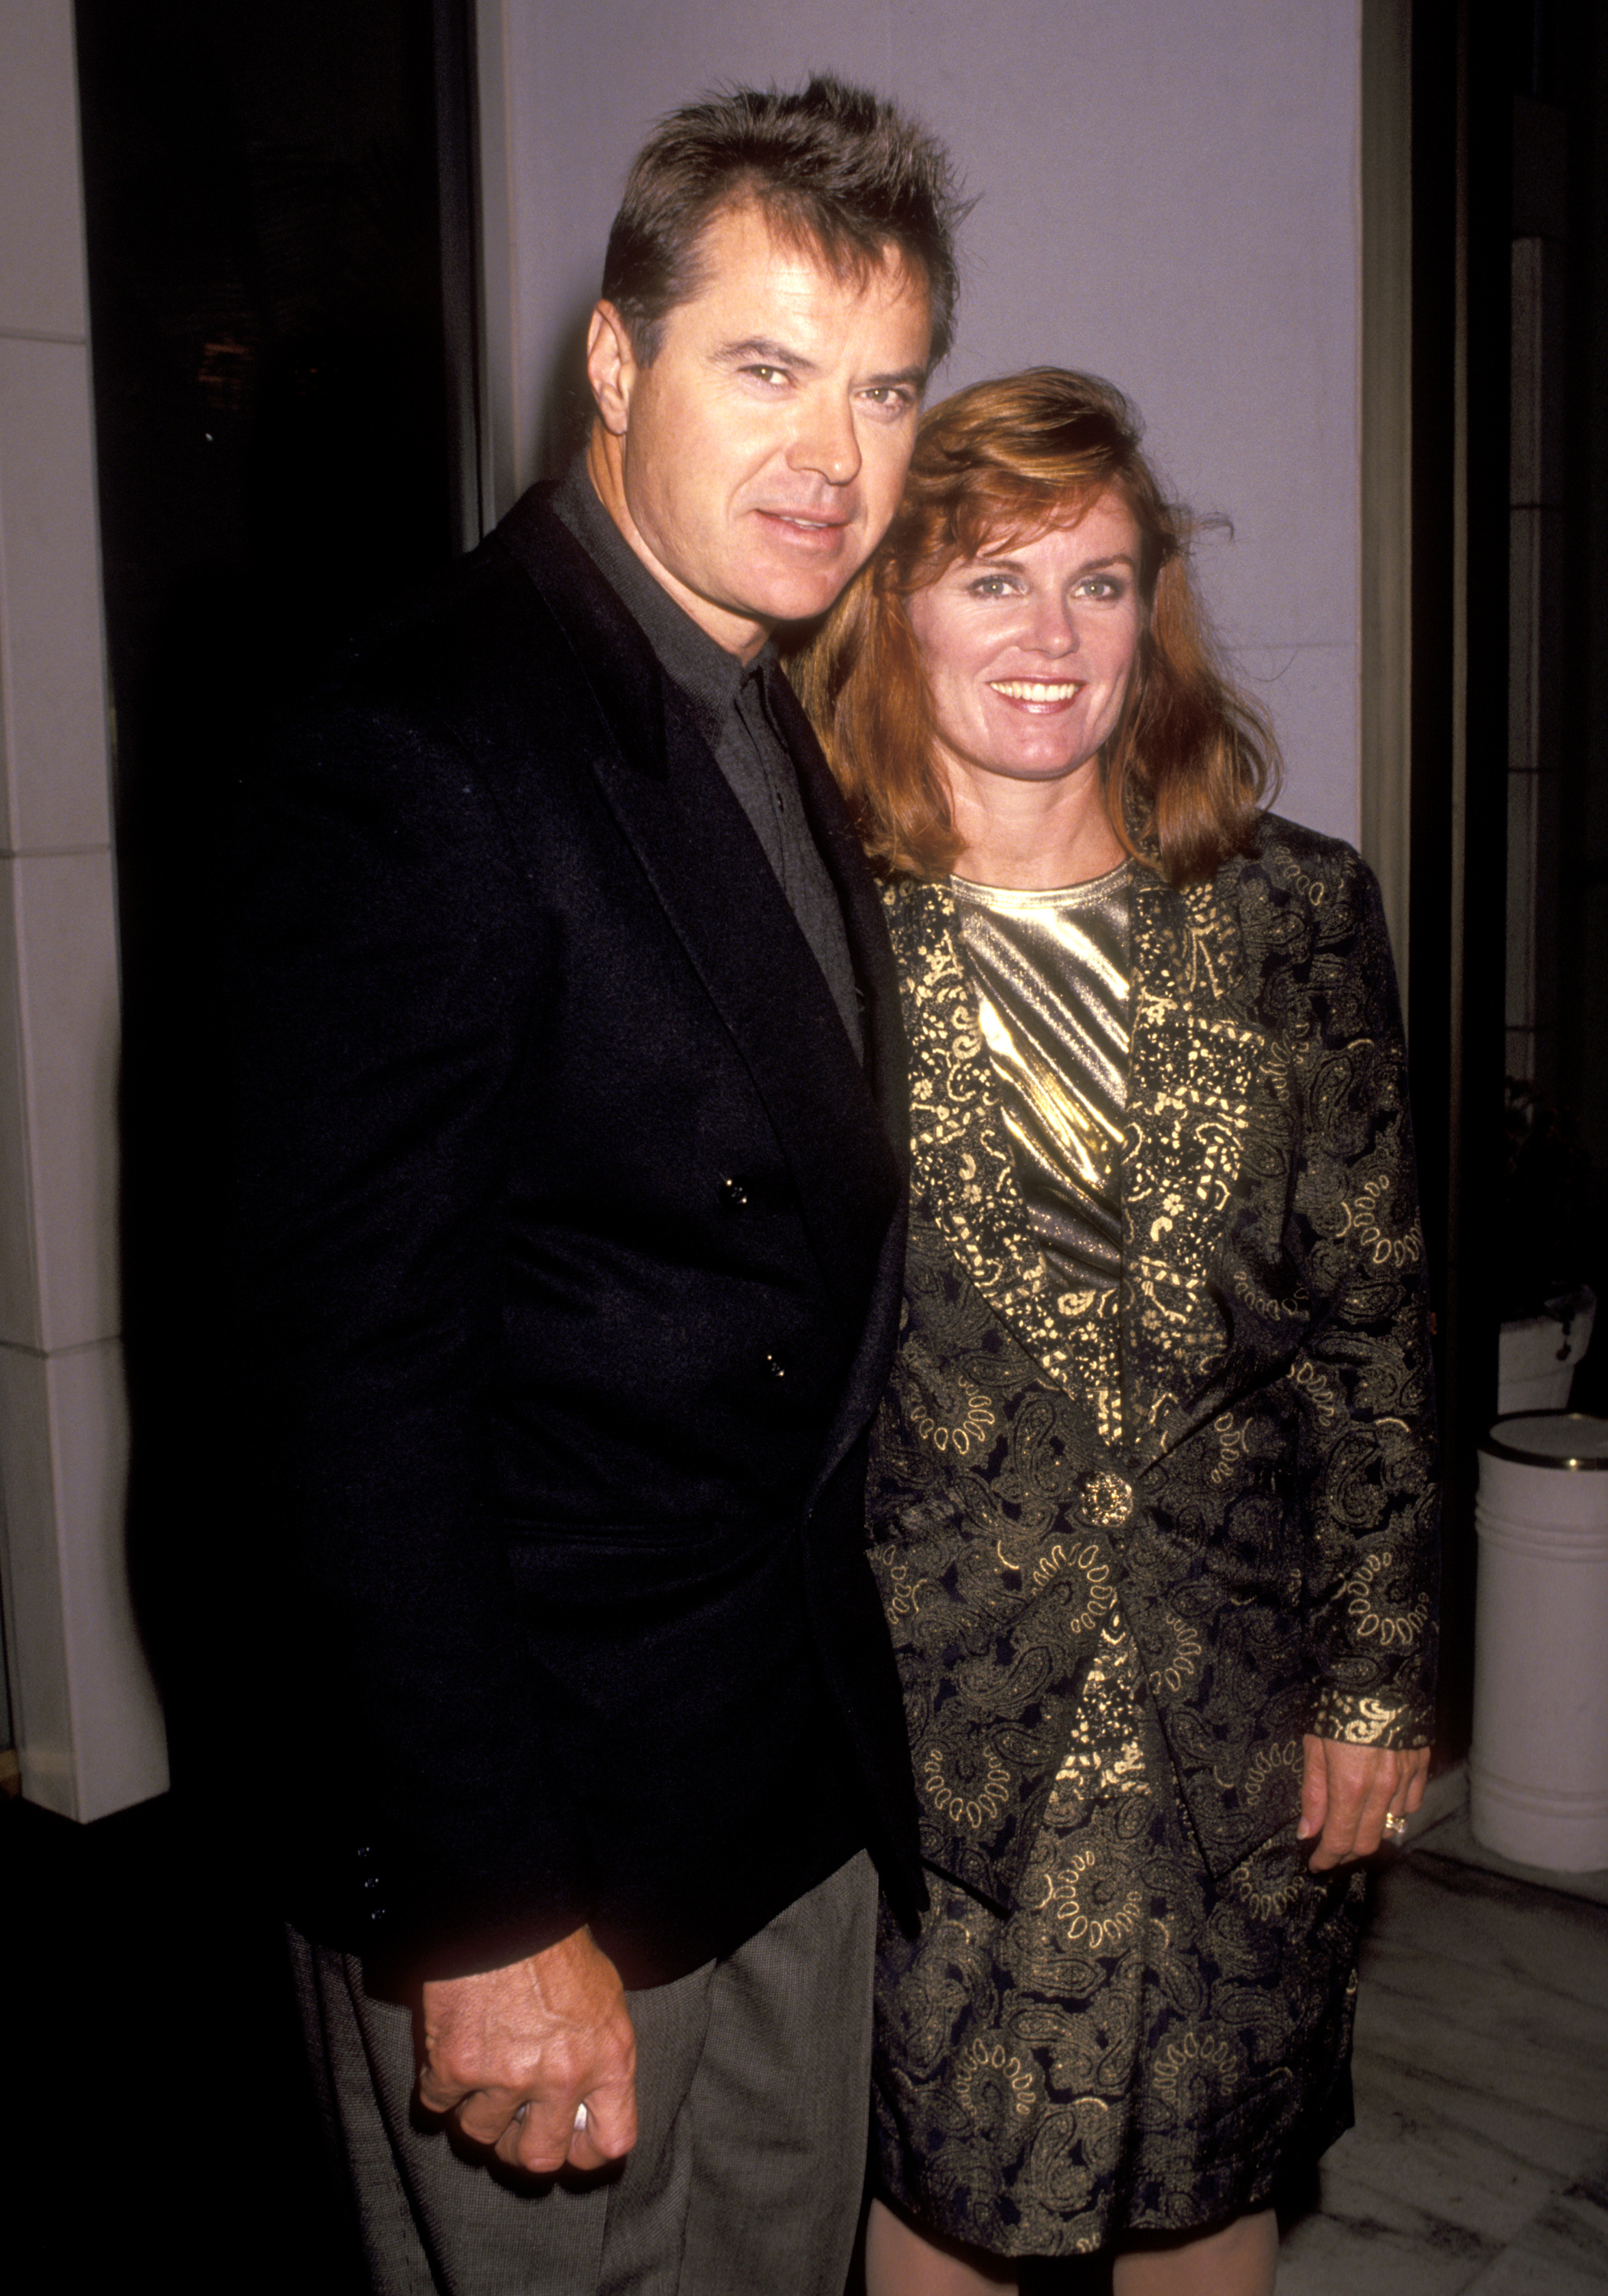 Robert Urich and Heather Menzies at the ABC Television Fall Season Kick-Off Party on September 11, 1991, in Los Angeles, California | Source: Getty Images